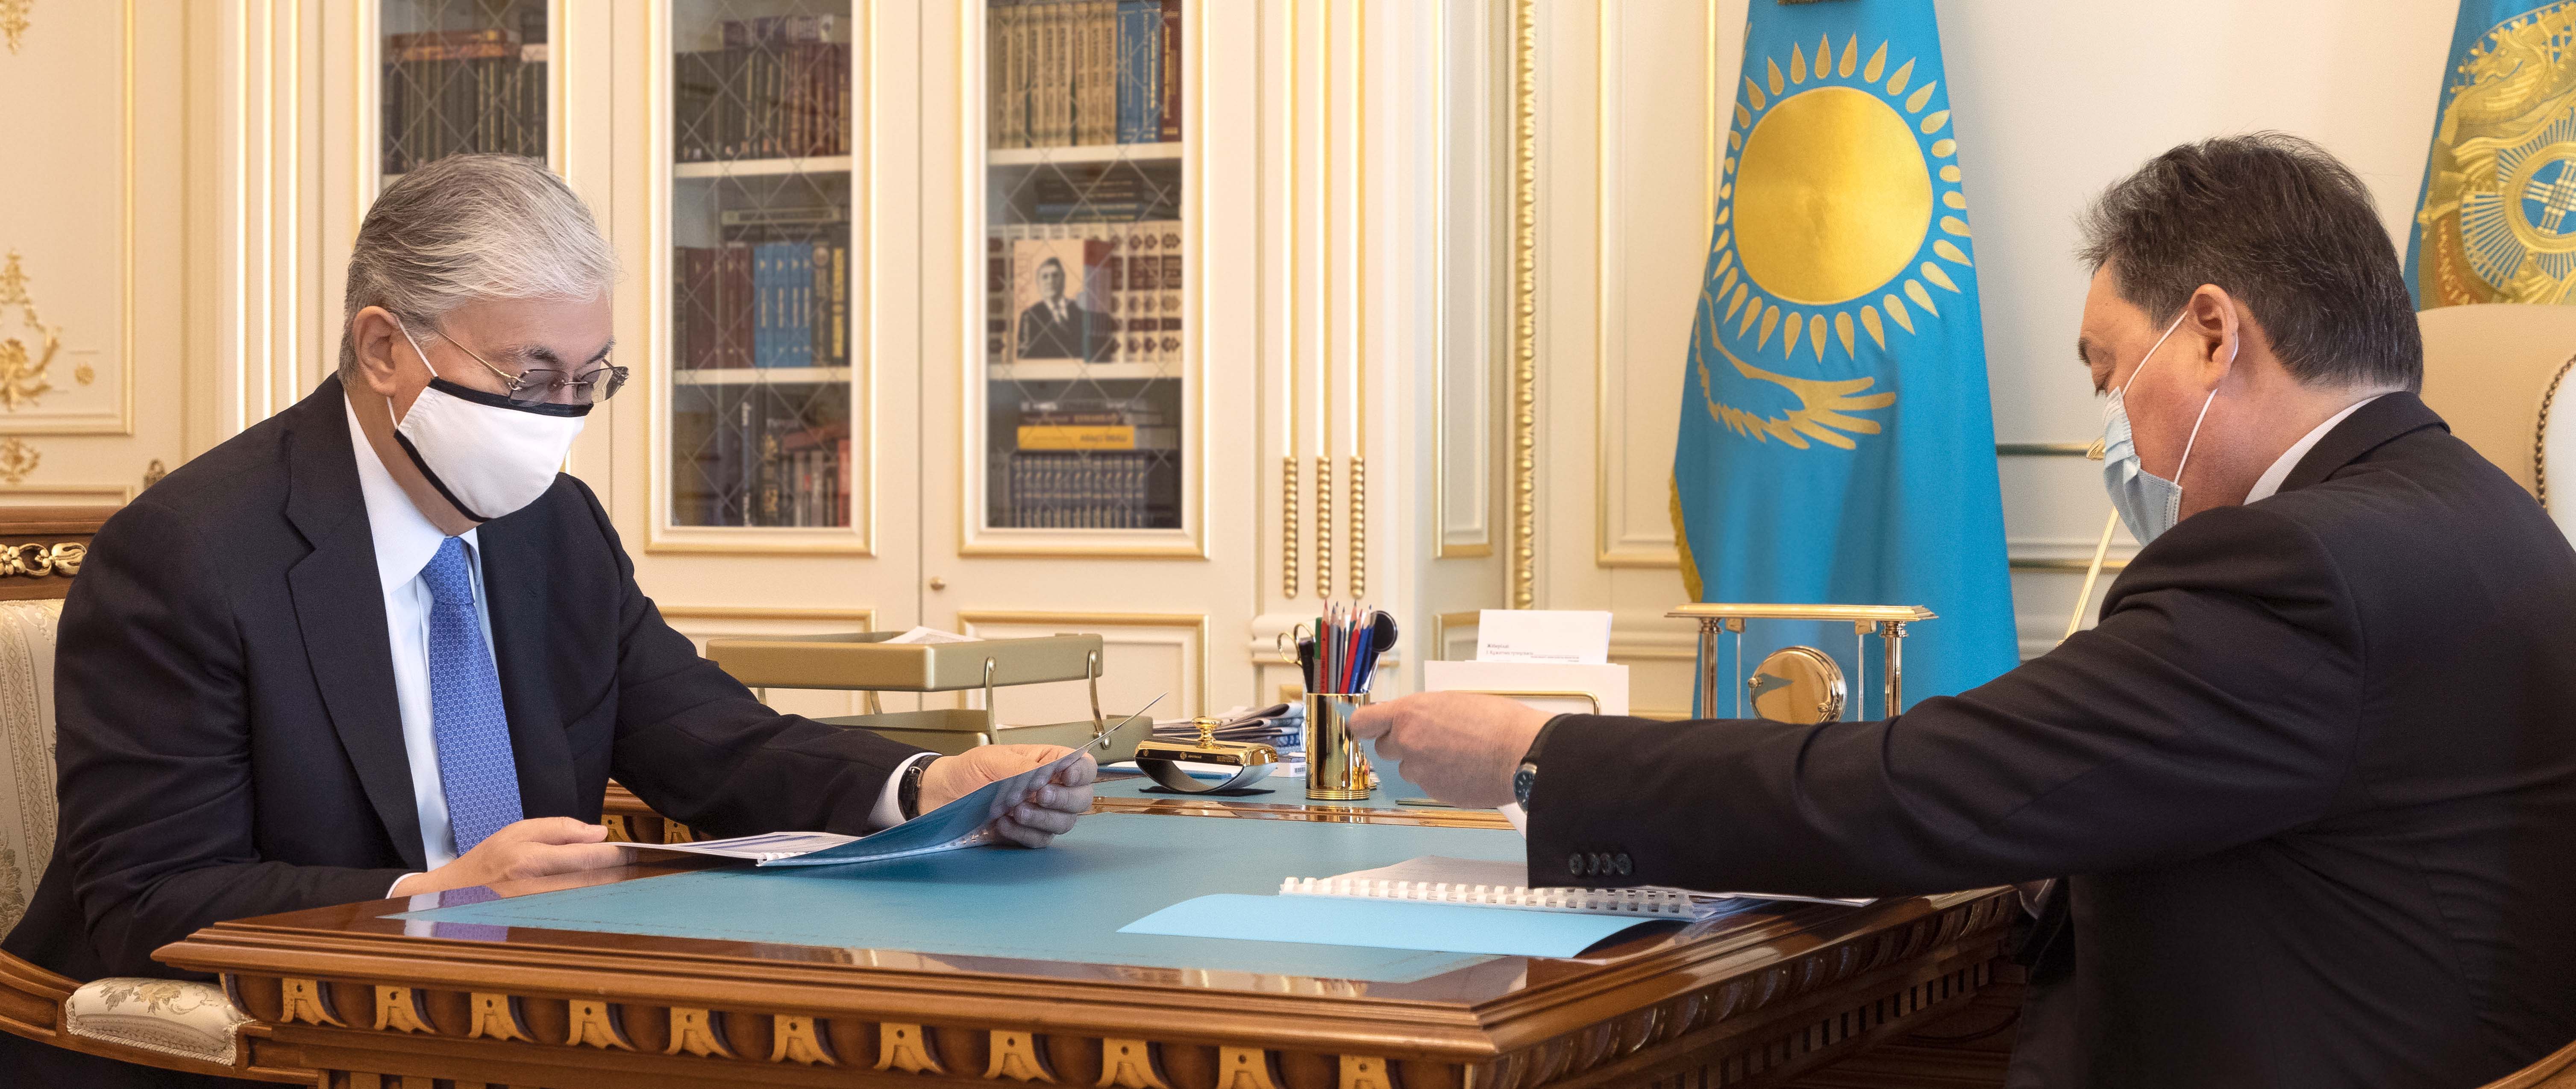 The Head of State receives Prime Minister Askar Mamin